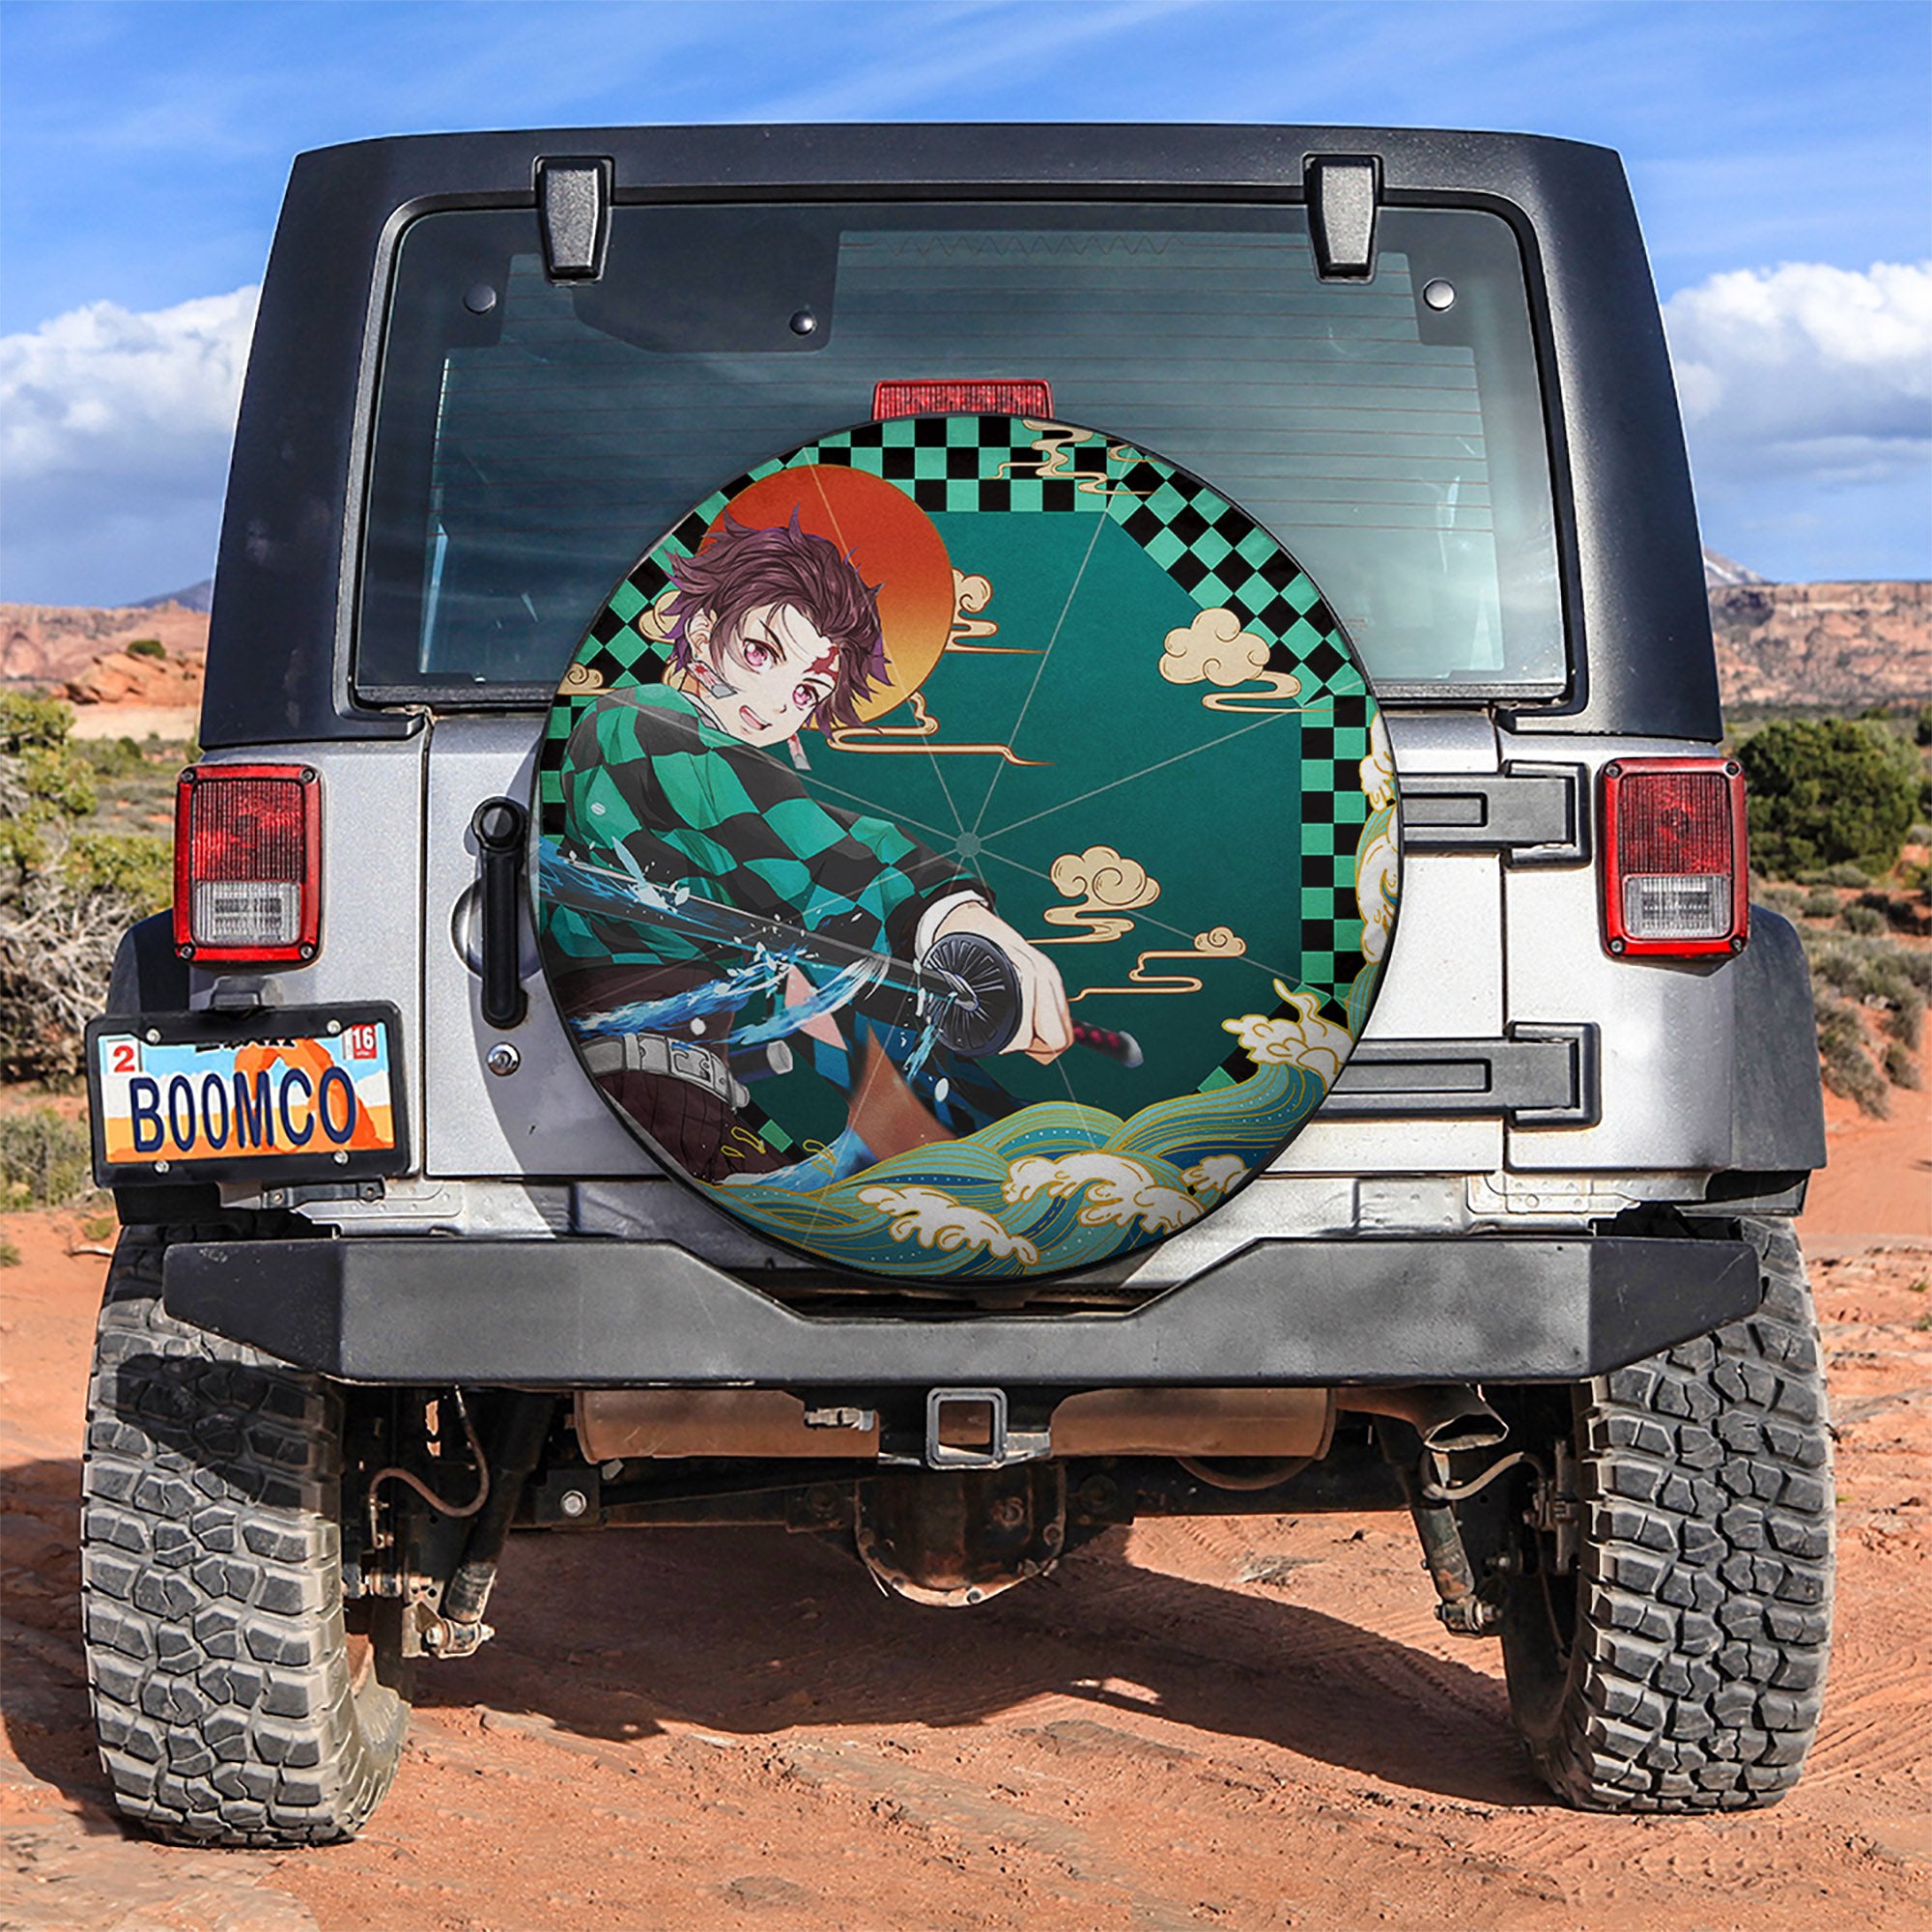 Tanjiro Style Demon Slayer Car Spare Tire Covers Gift For Campers Nearkii